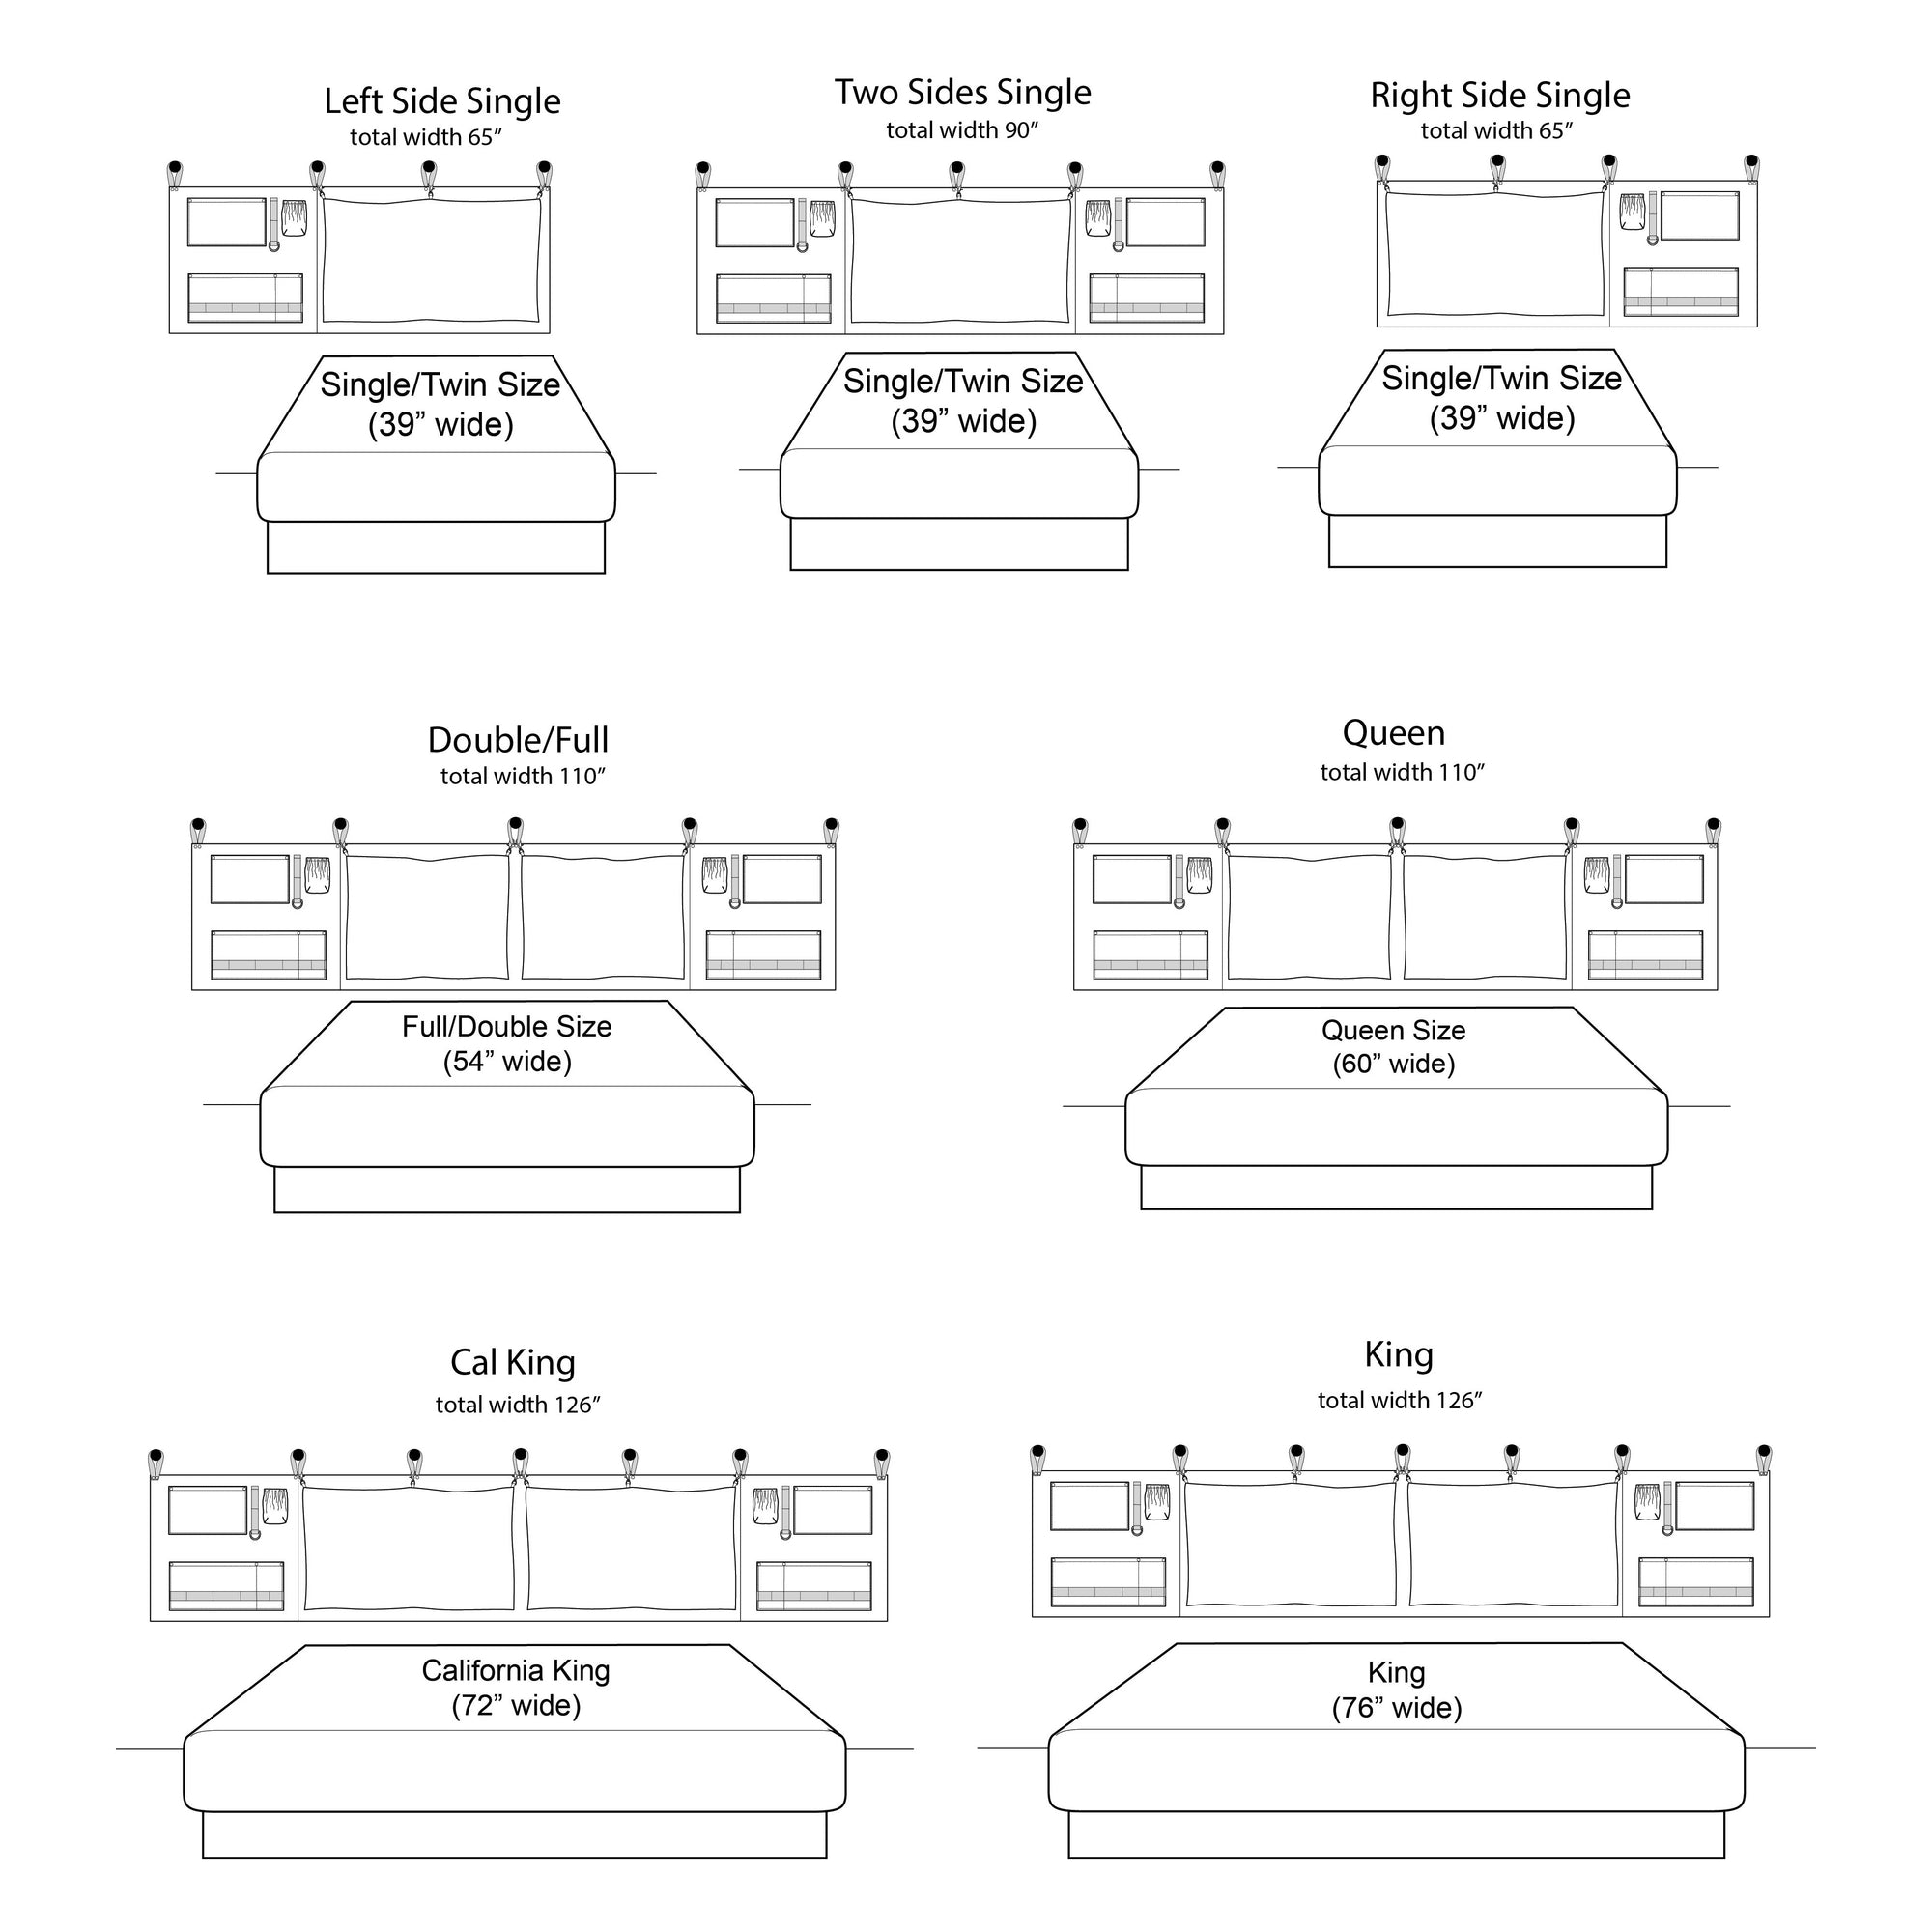 Tech line art drawings of options and sizes when choosing the right scout headboard for your room.